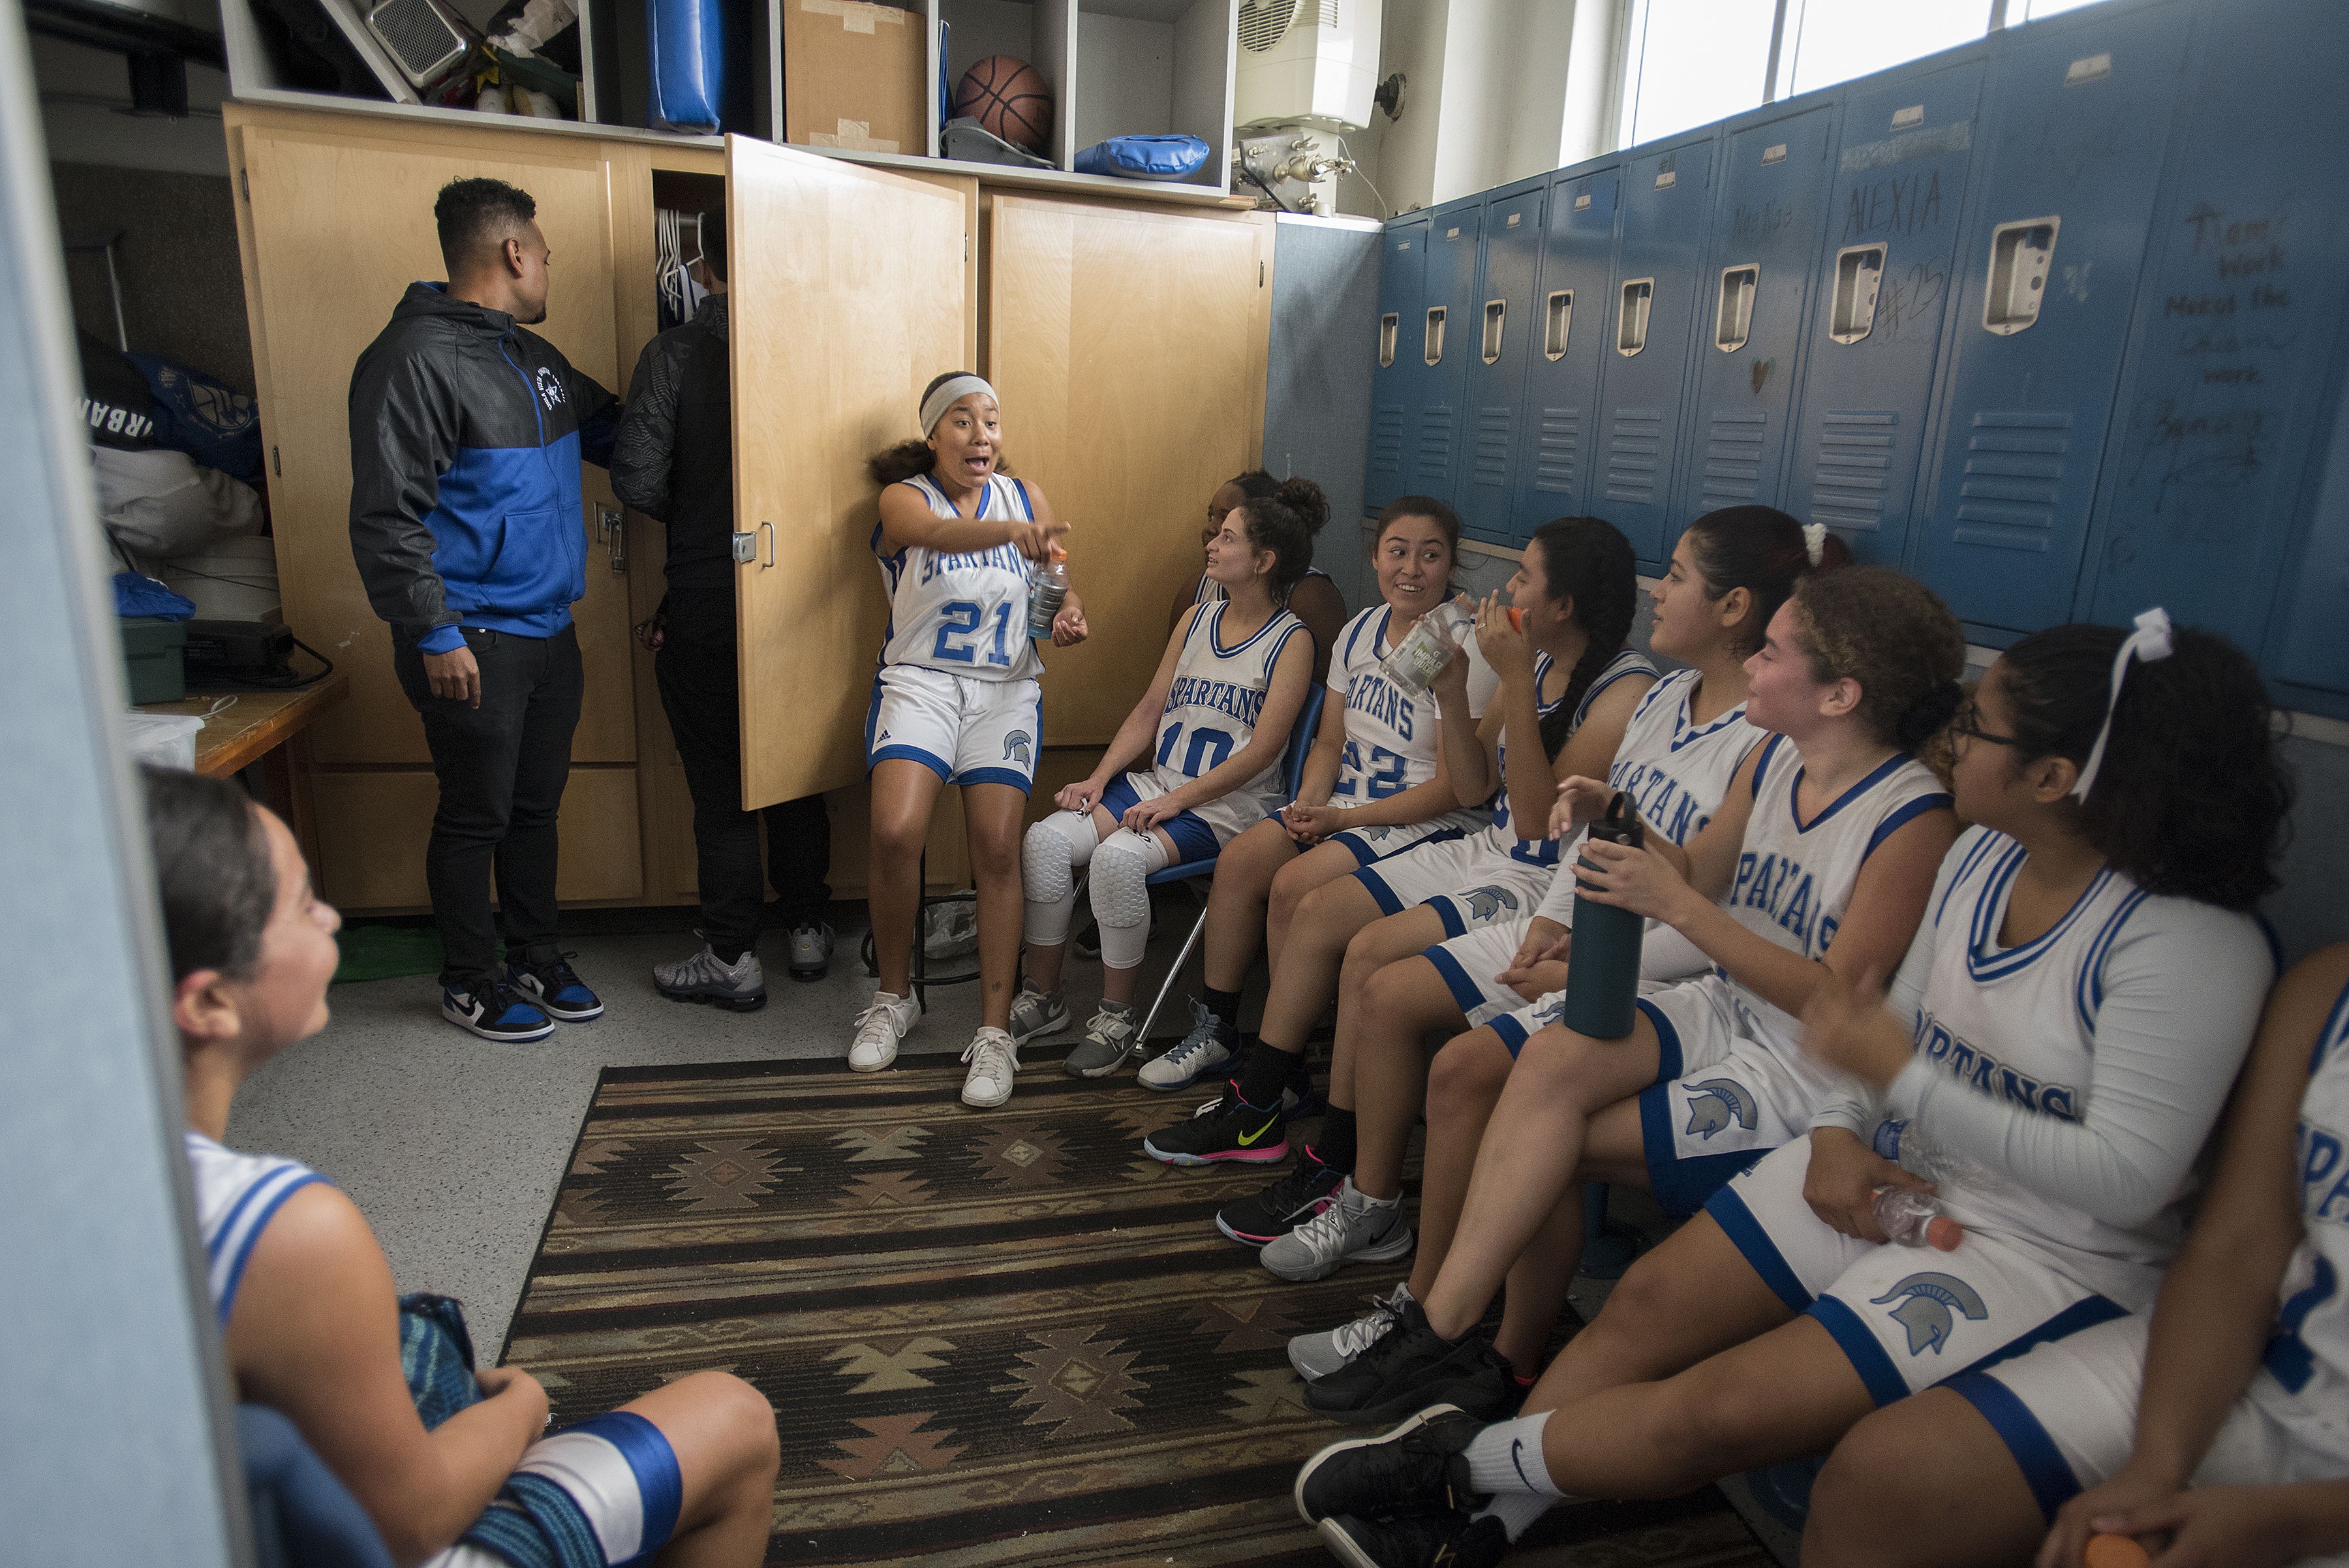 Kennedy Flores, 16, second from right, joins teammates in the locker room at halftime at Chula Vista High School on Nov. 27. Flores is one of the captains of her basketball team. Image by Amanda Cowan. United States, 2019.